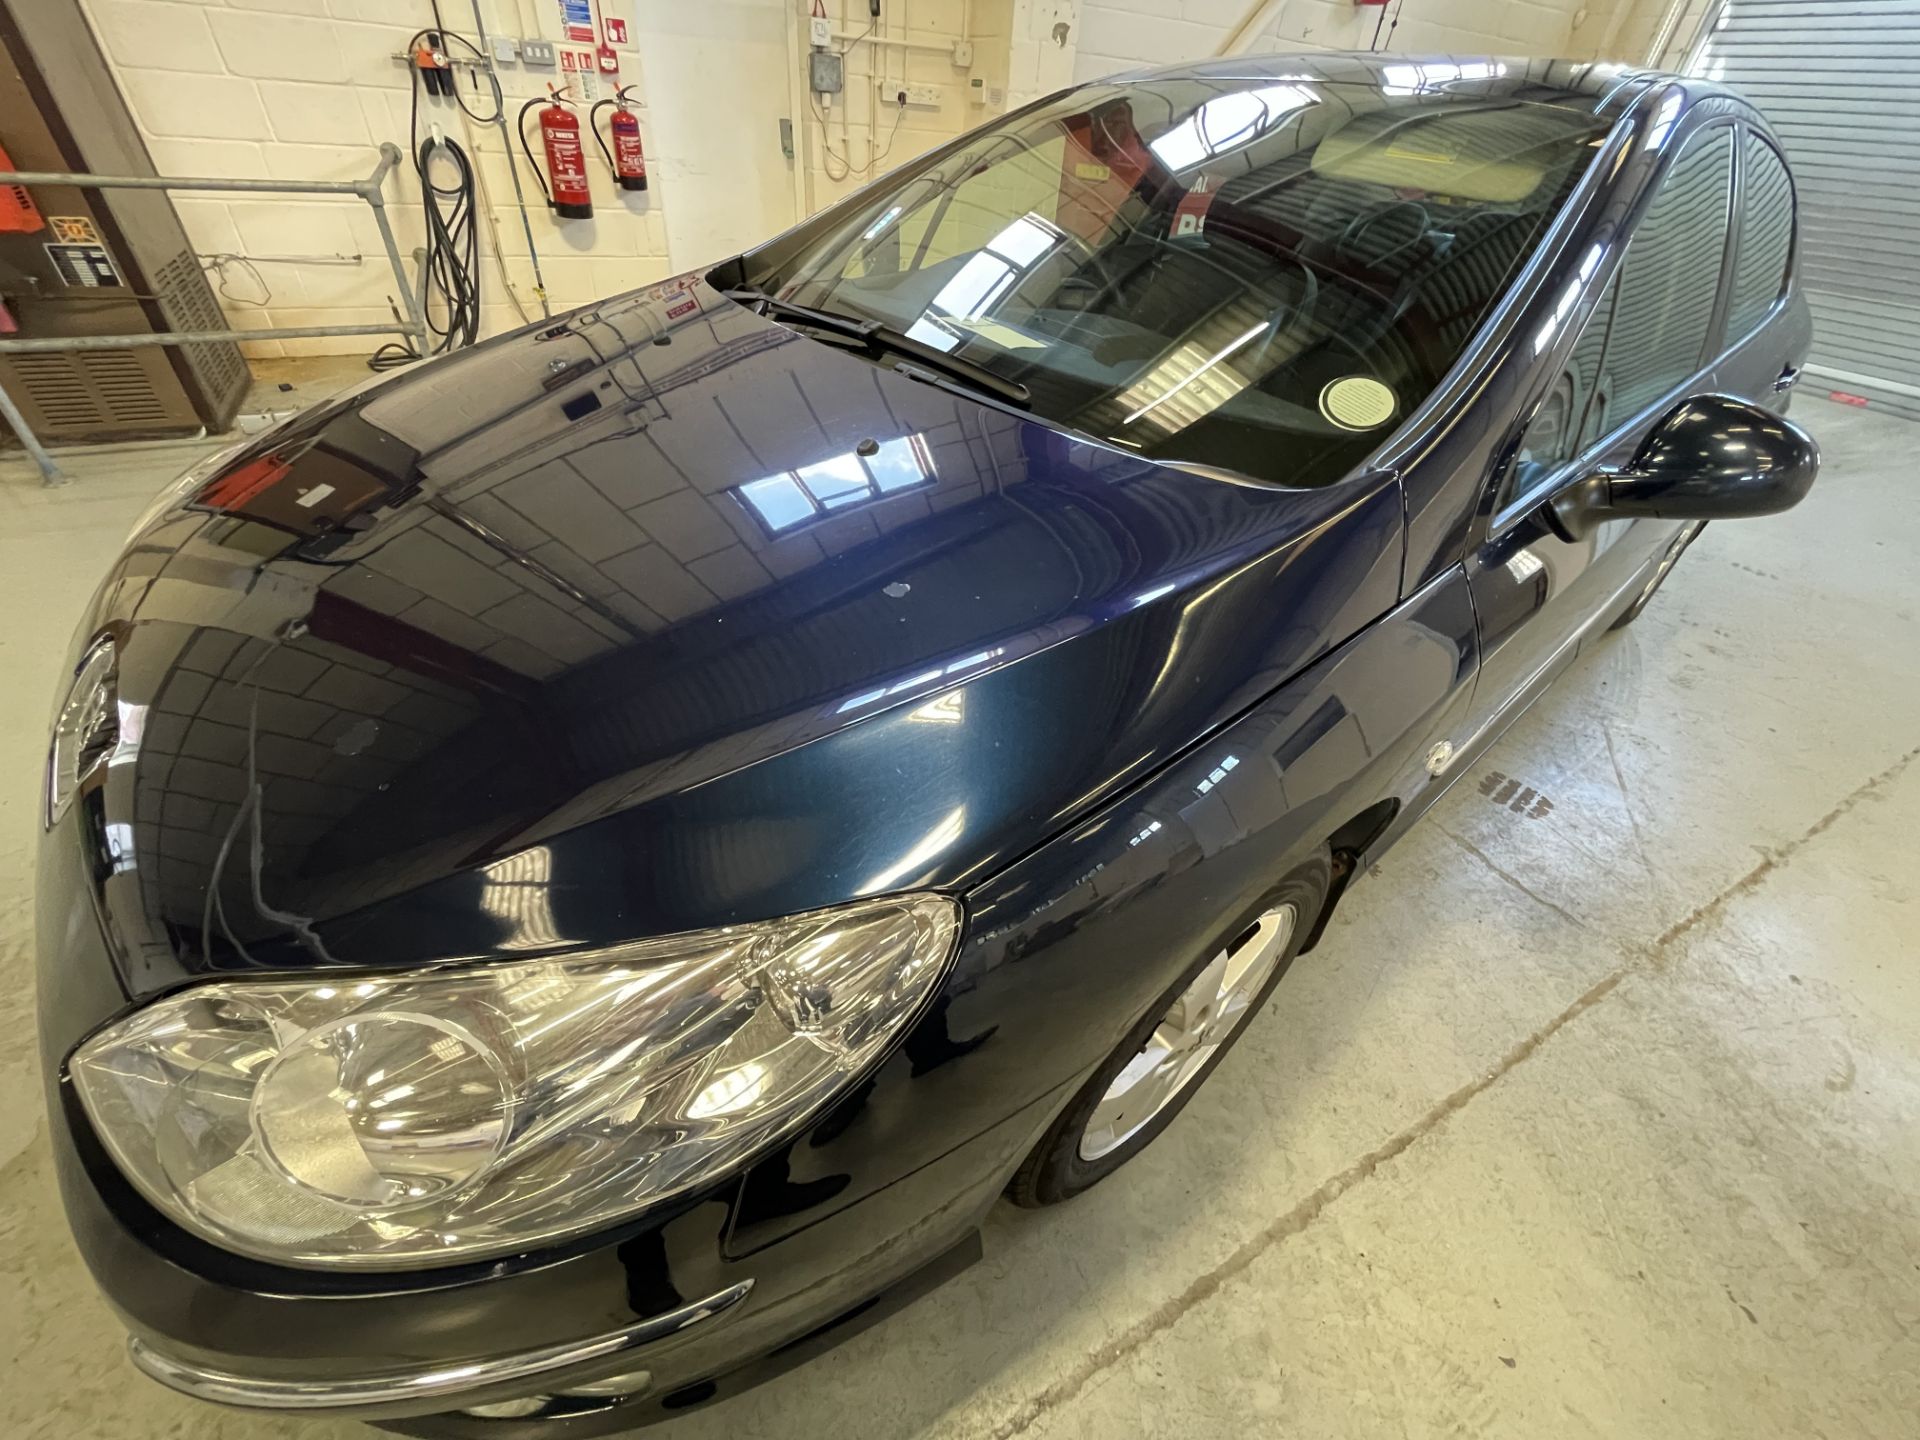 Peugeot 407 SPORT 2.0 HDi 140 DIESEL ENGINE FOUR DOOR SALOON, registration no. SY59 UTF, indicated - Image 2 of 17